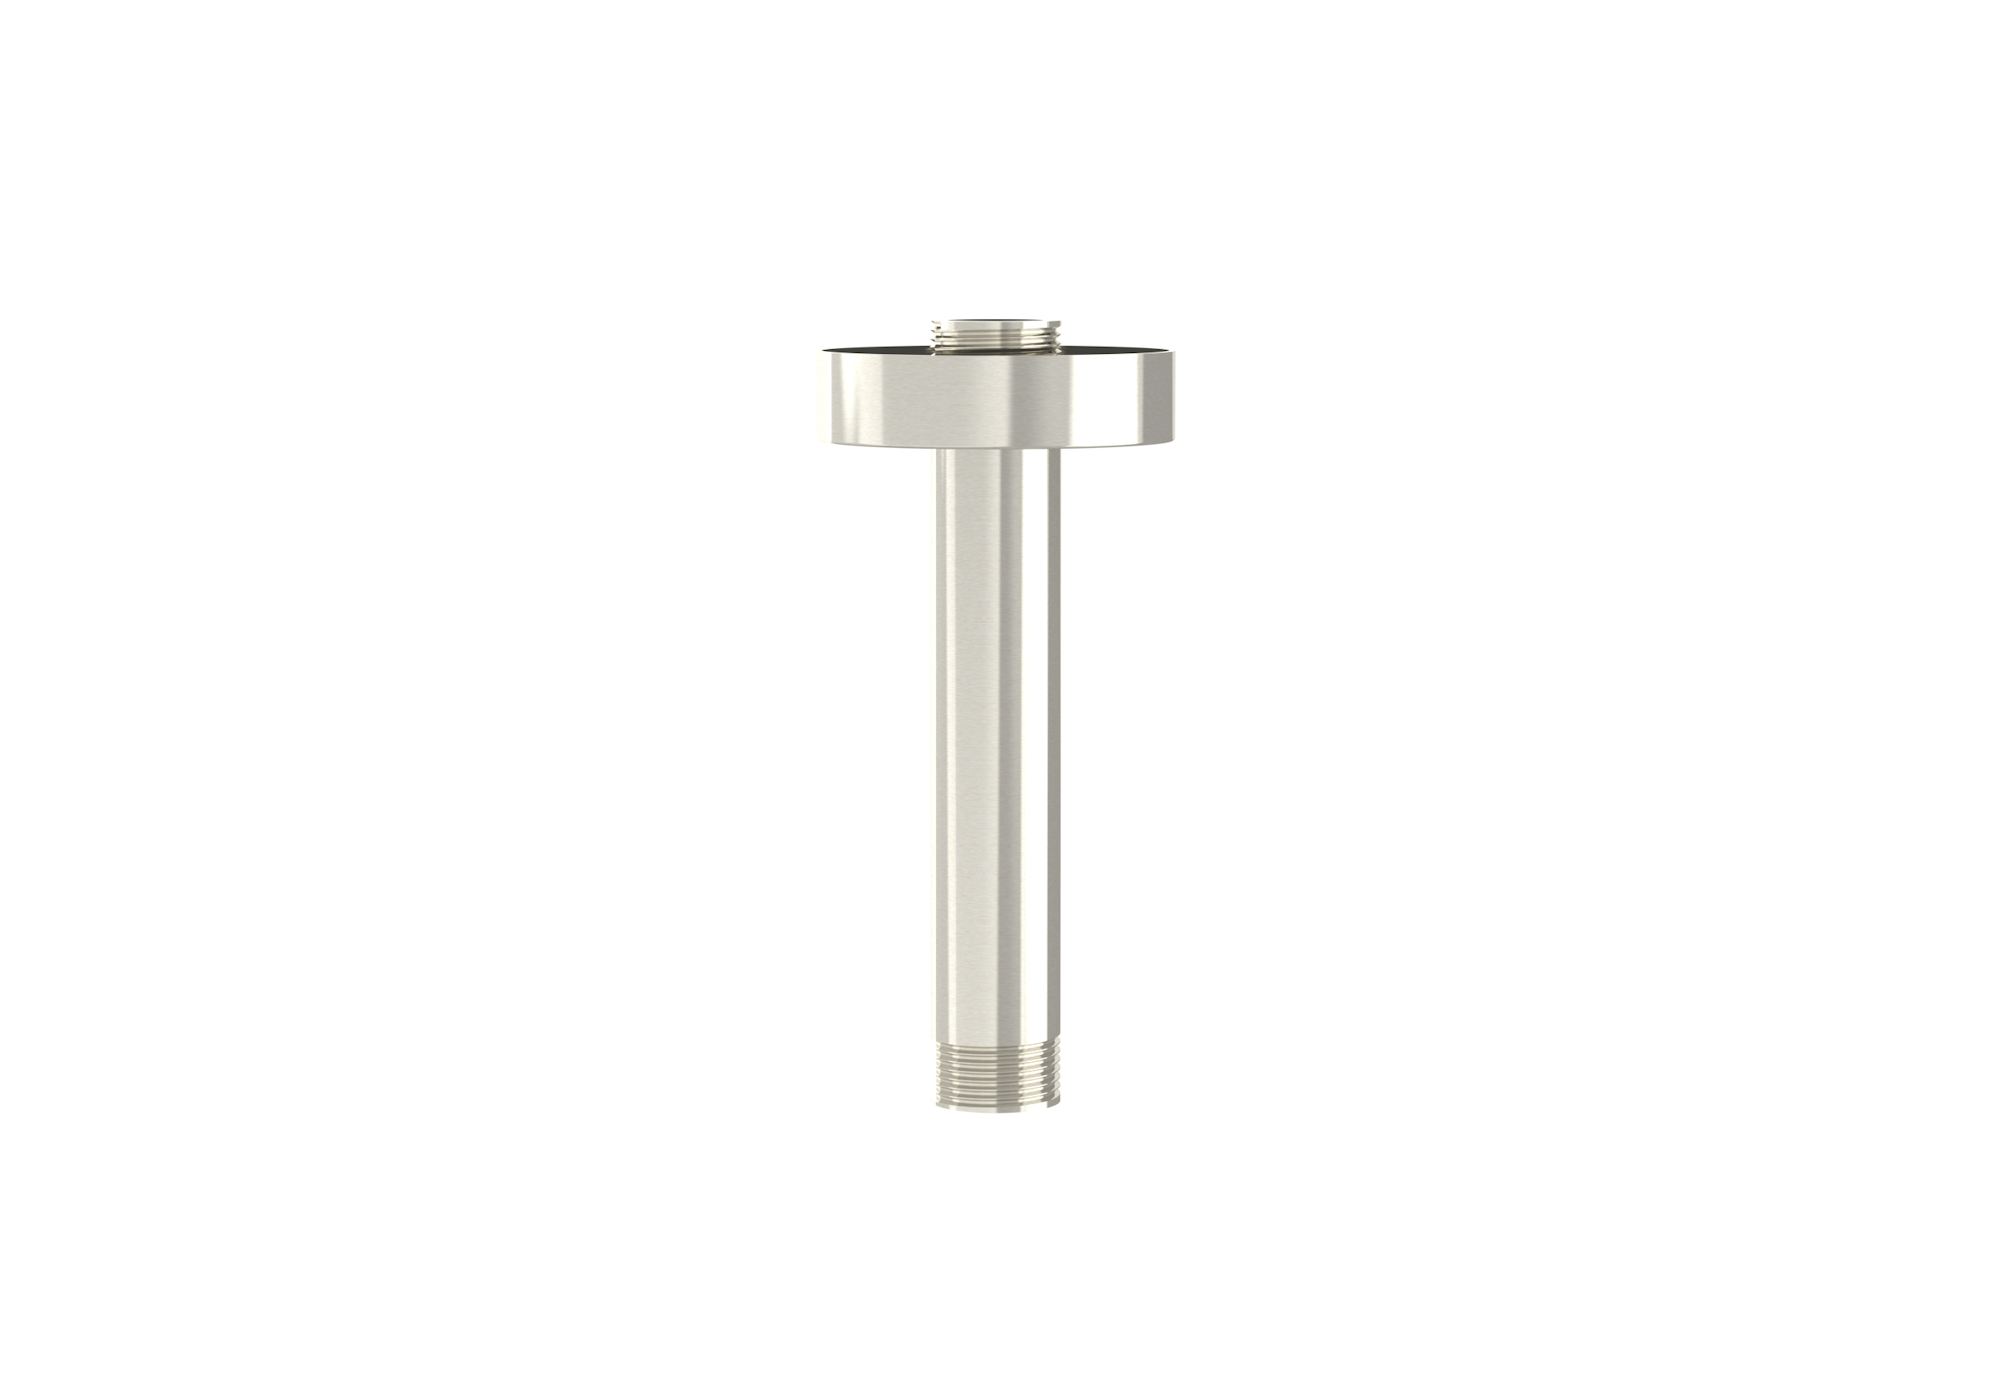 COS 100mm round ceiling mounted shower arm - Brushed Nickel